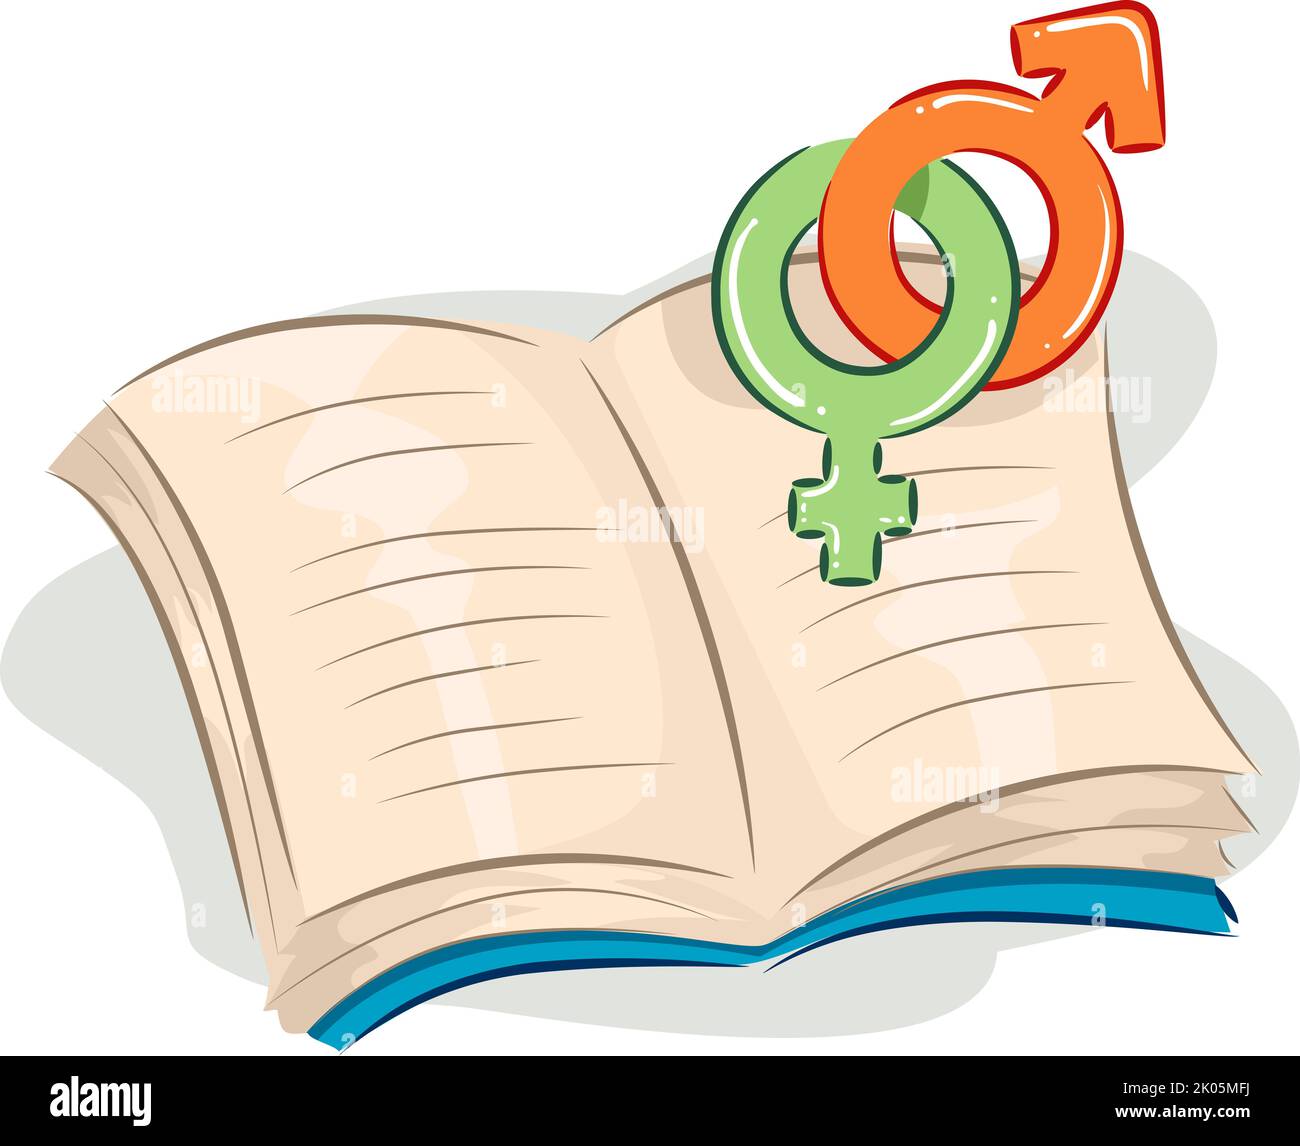 Illustration of Open Book with Male and Female Gender Symbol Intertwined Stock Photo